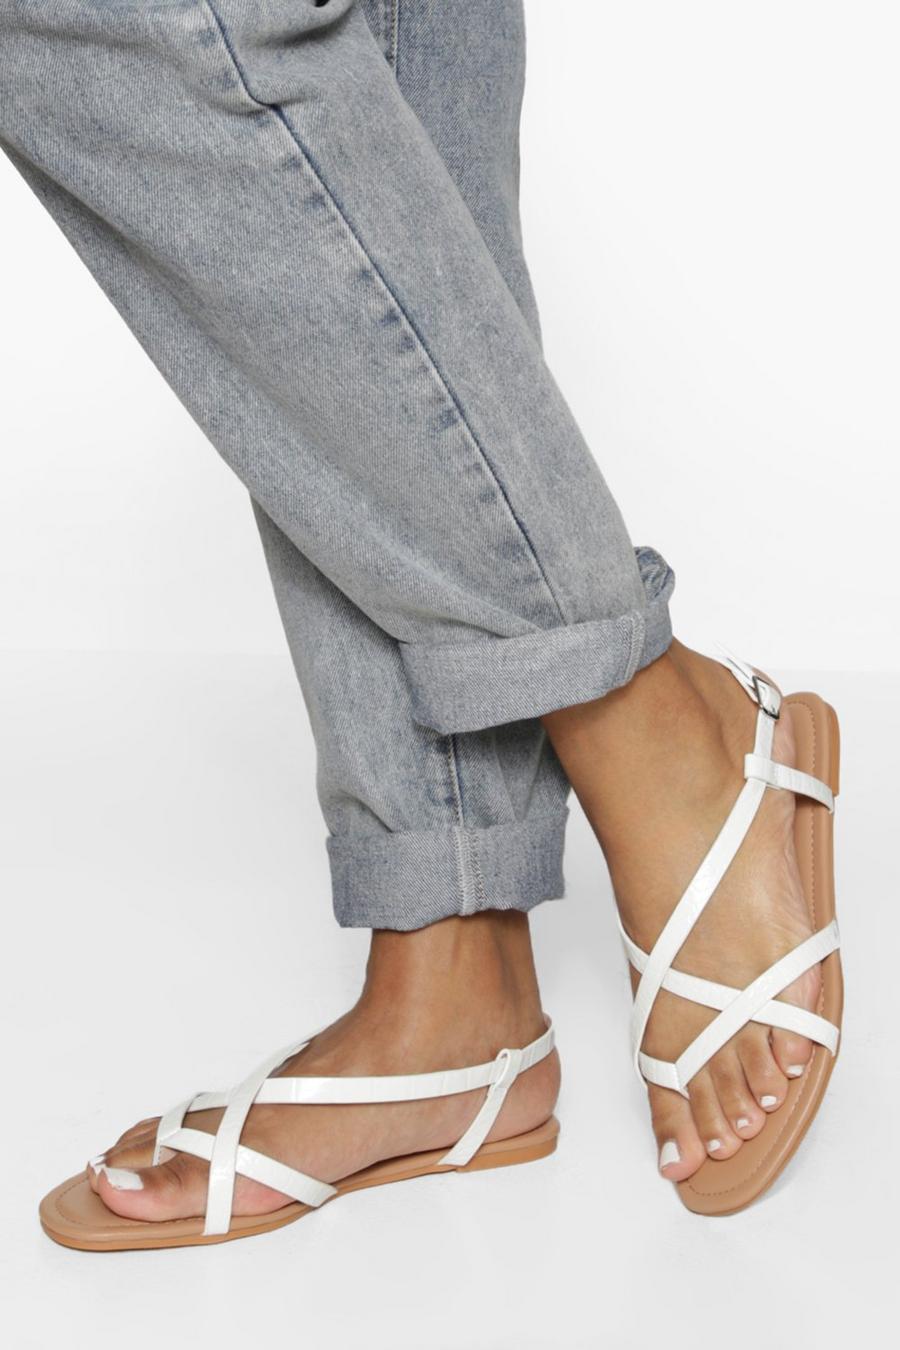 White blanco Wide Fit Croc Toe Post Basic Strappy Sandal